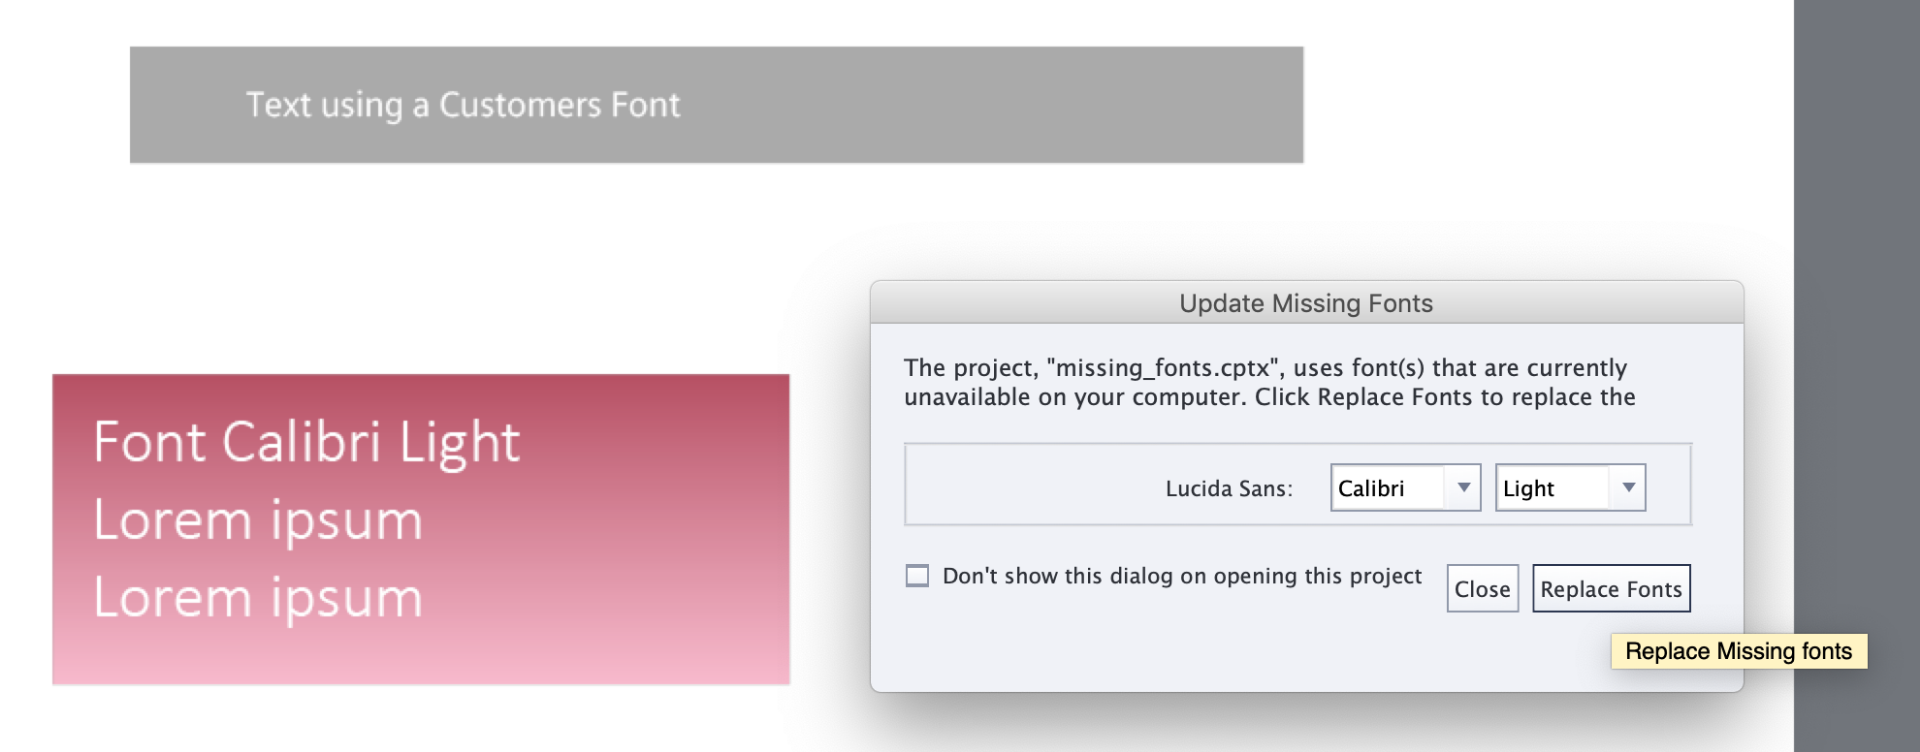 fonts_before.png